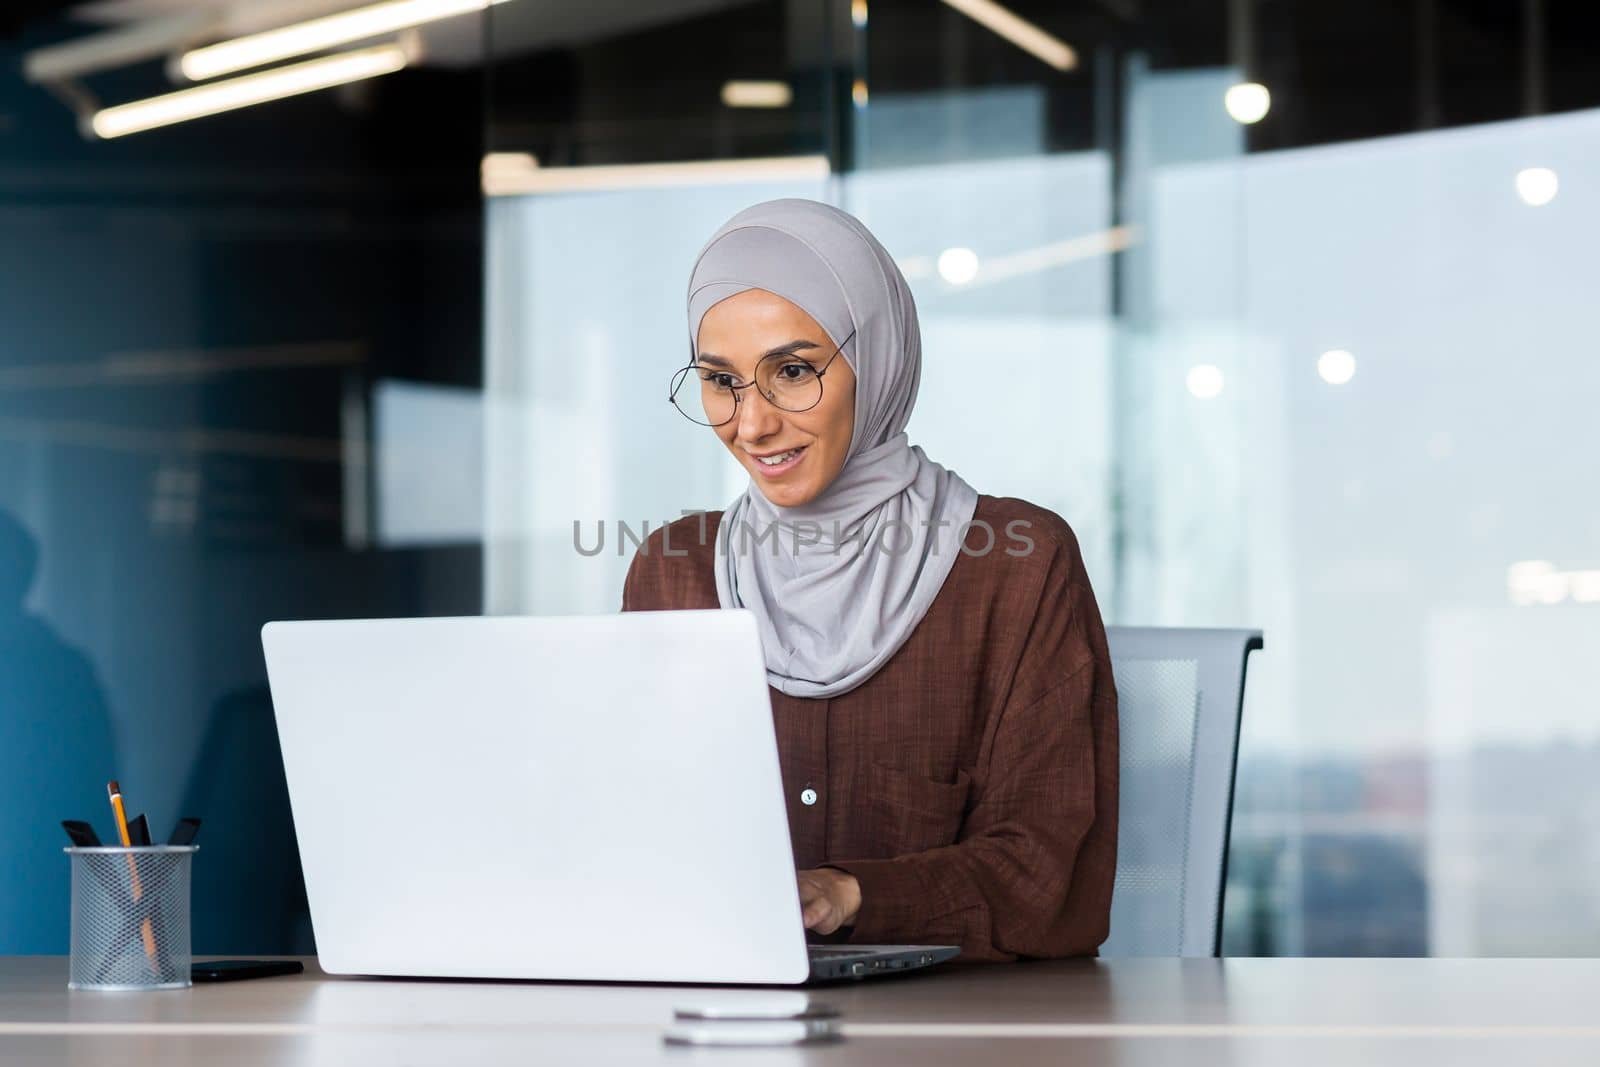 Smiling and dreamy businesswoman working inside office with laptop, woman in hijab and glasses office worker happy and satisfied with work sitting at desk by voronaman